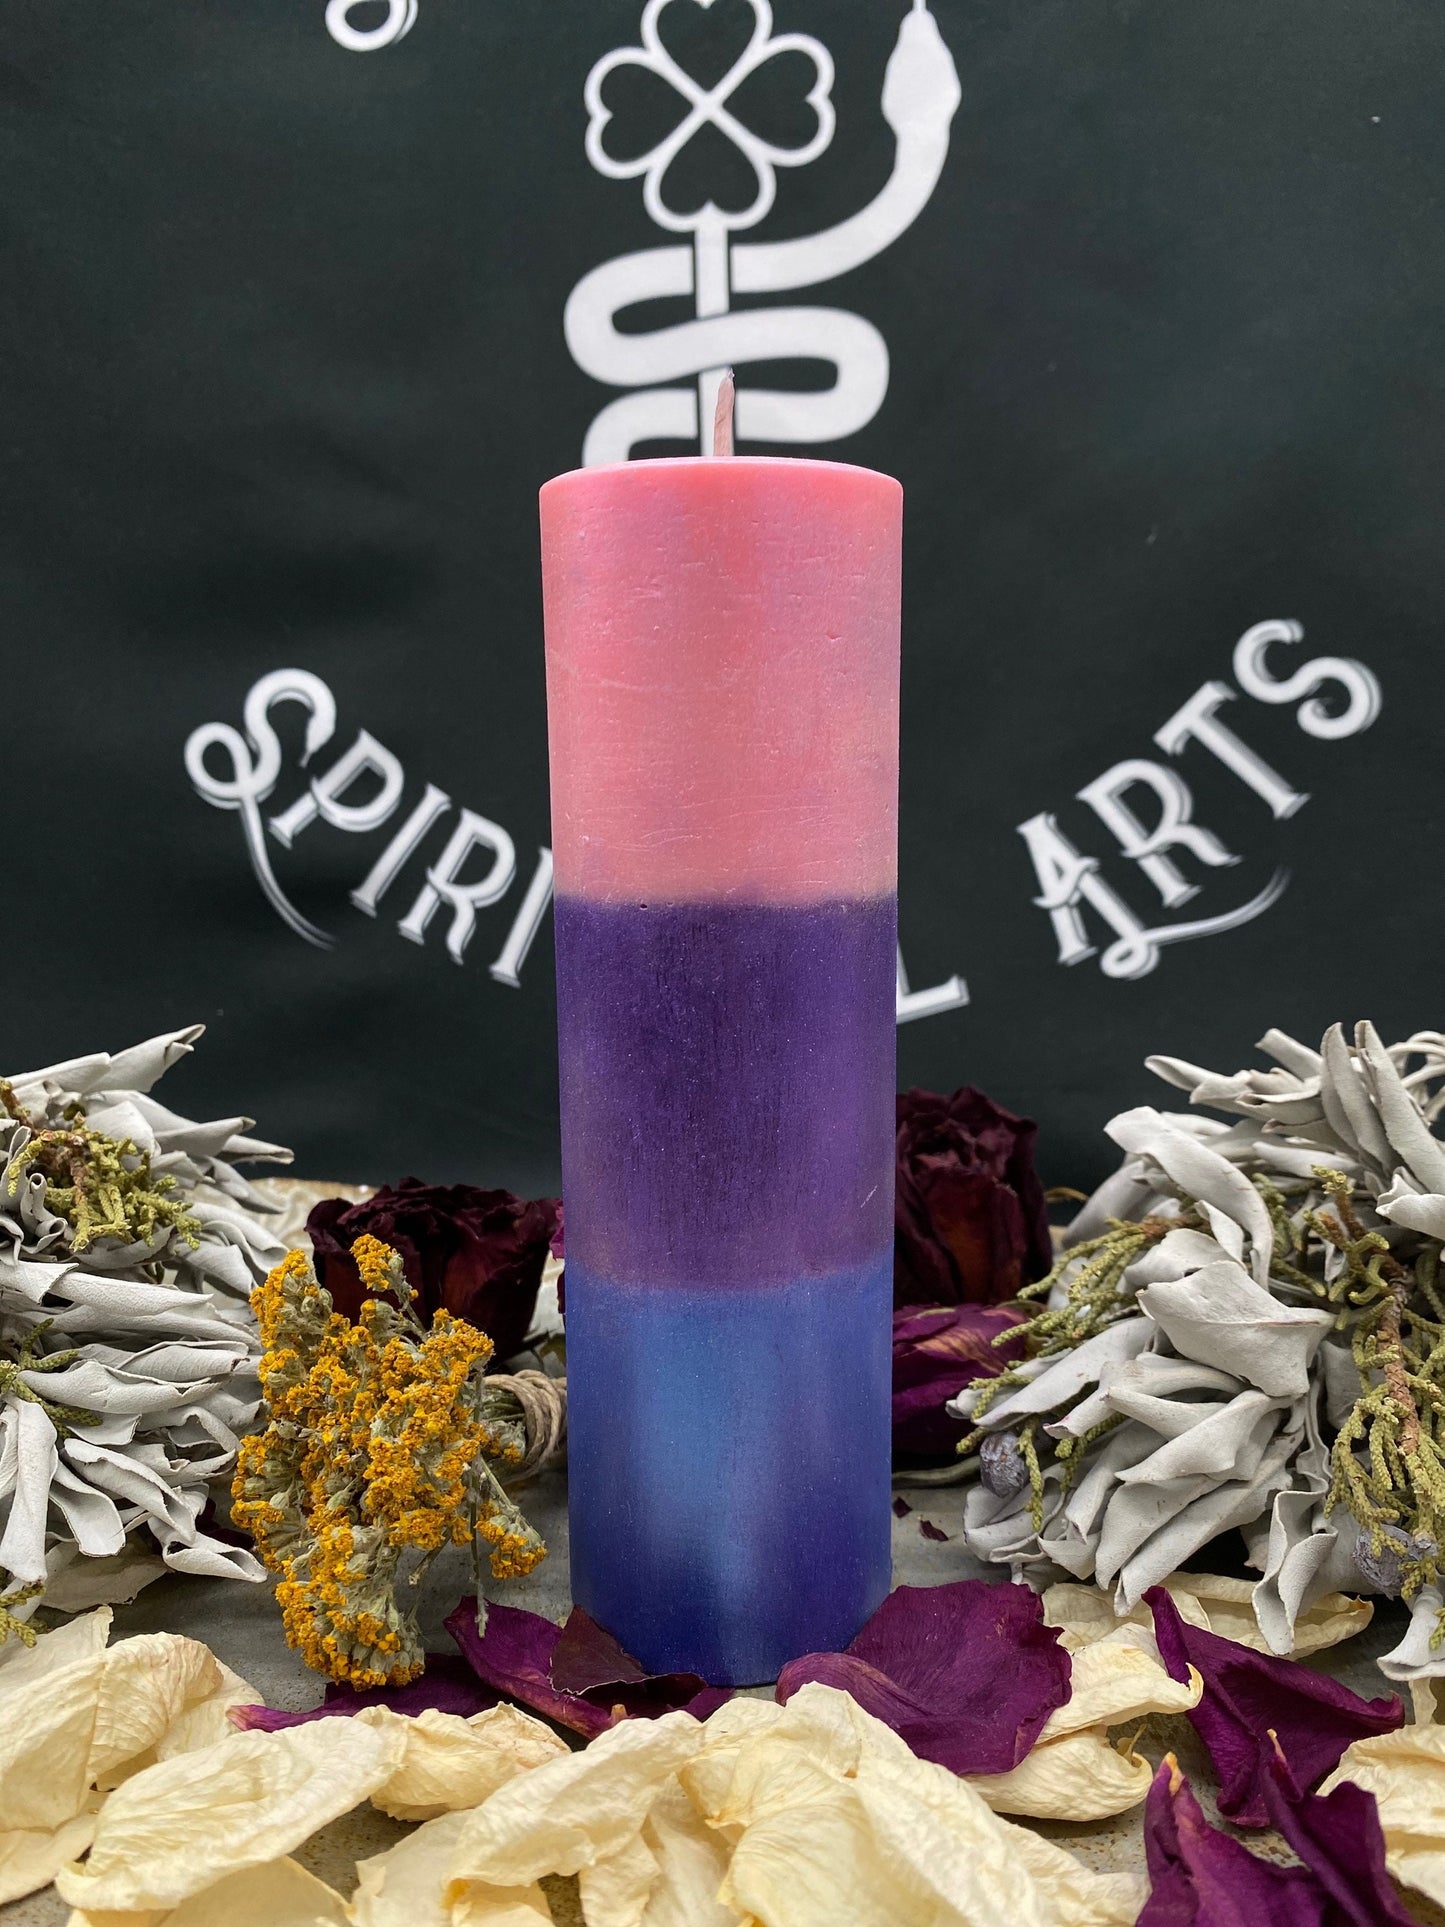 Bisexual Pride Pillar Candle + Love + Passion + Sex + Casual Encounters